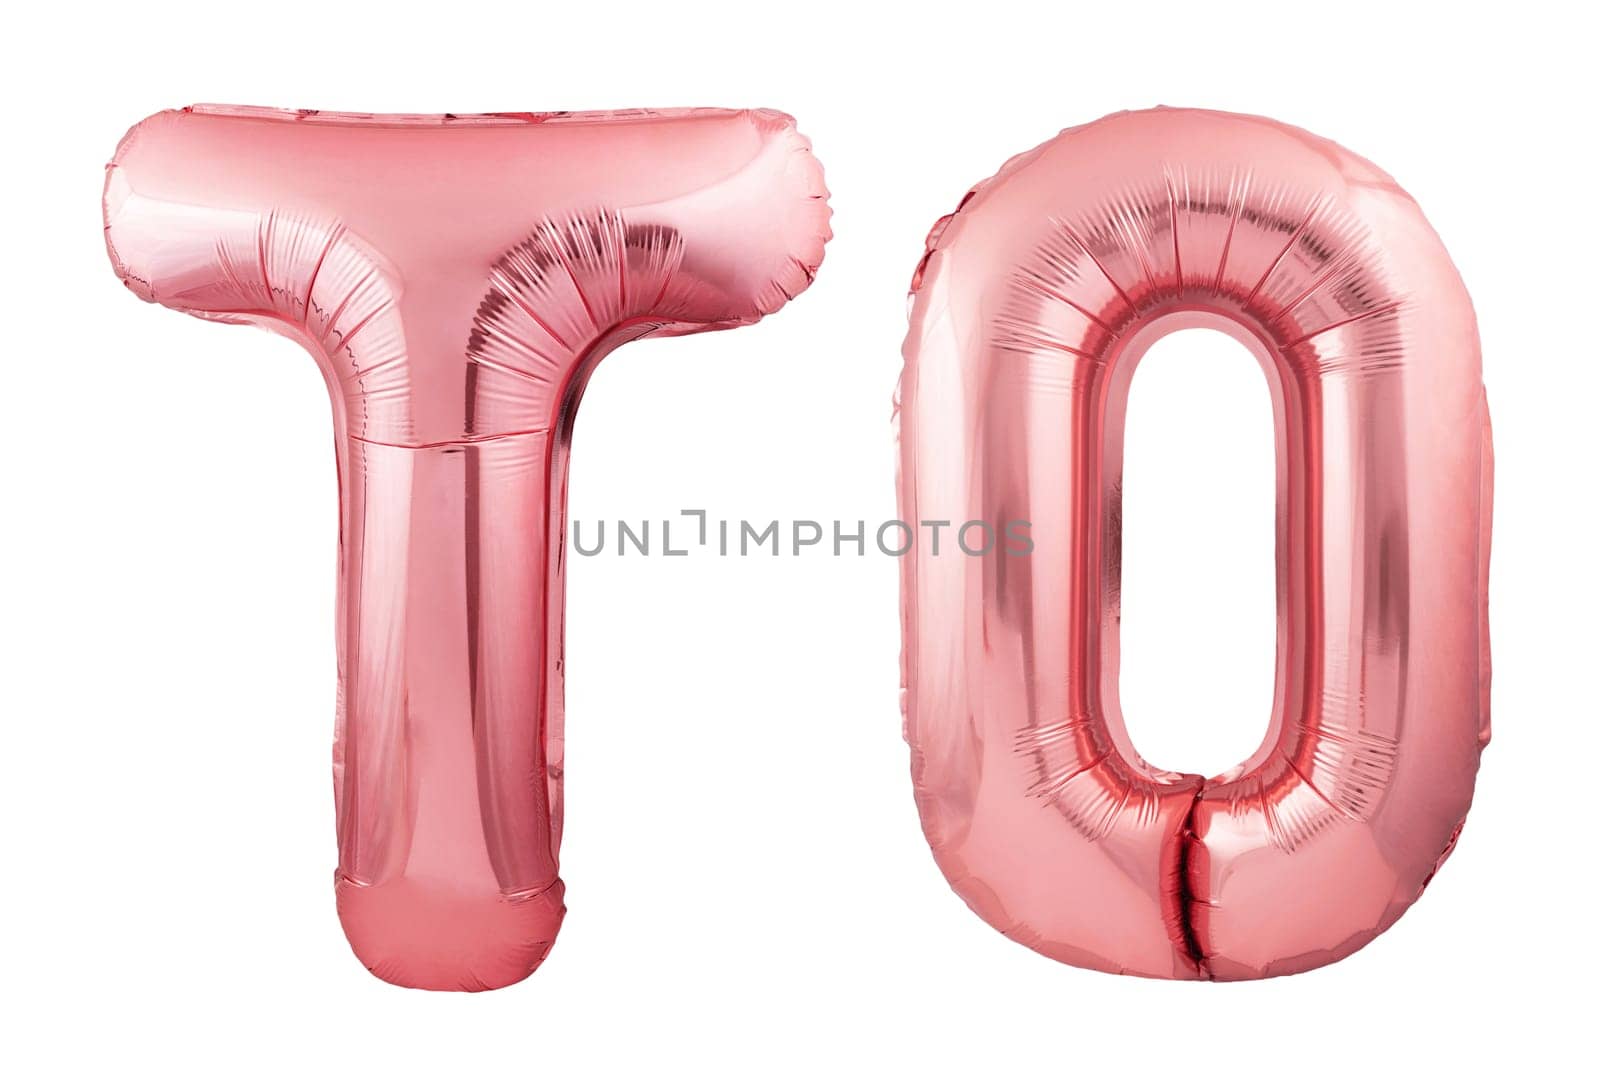 Words summer time made of colorful inflatable balloon letters isolated on white background. Helium balloons forming words summer time